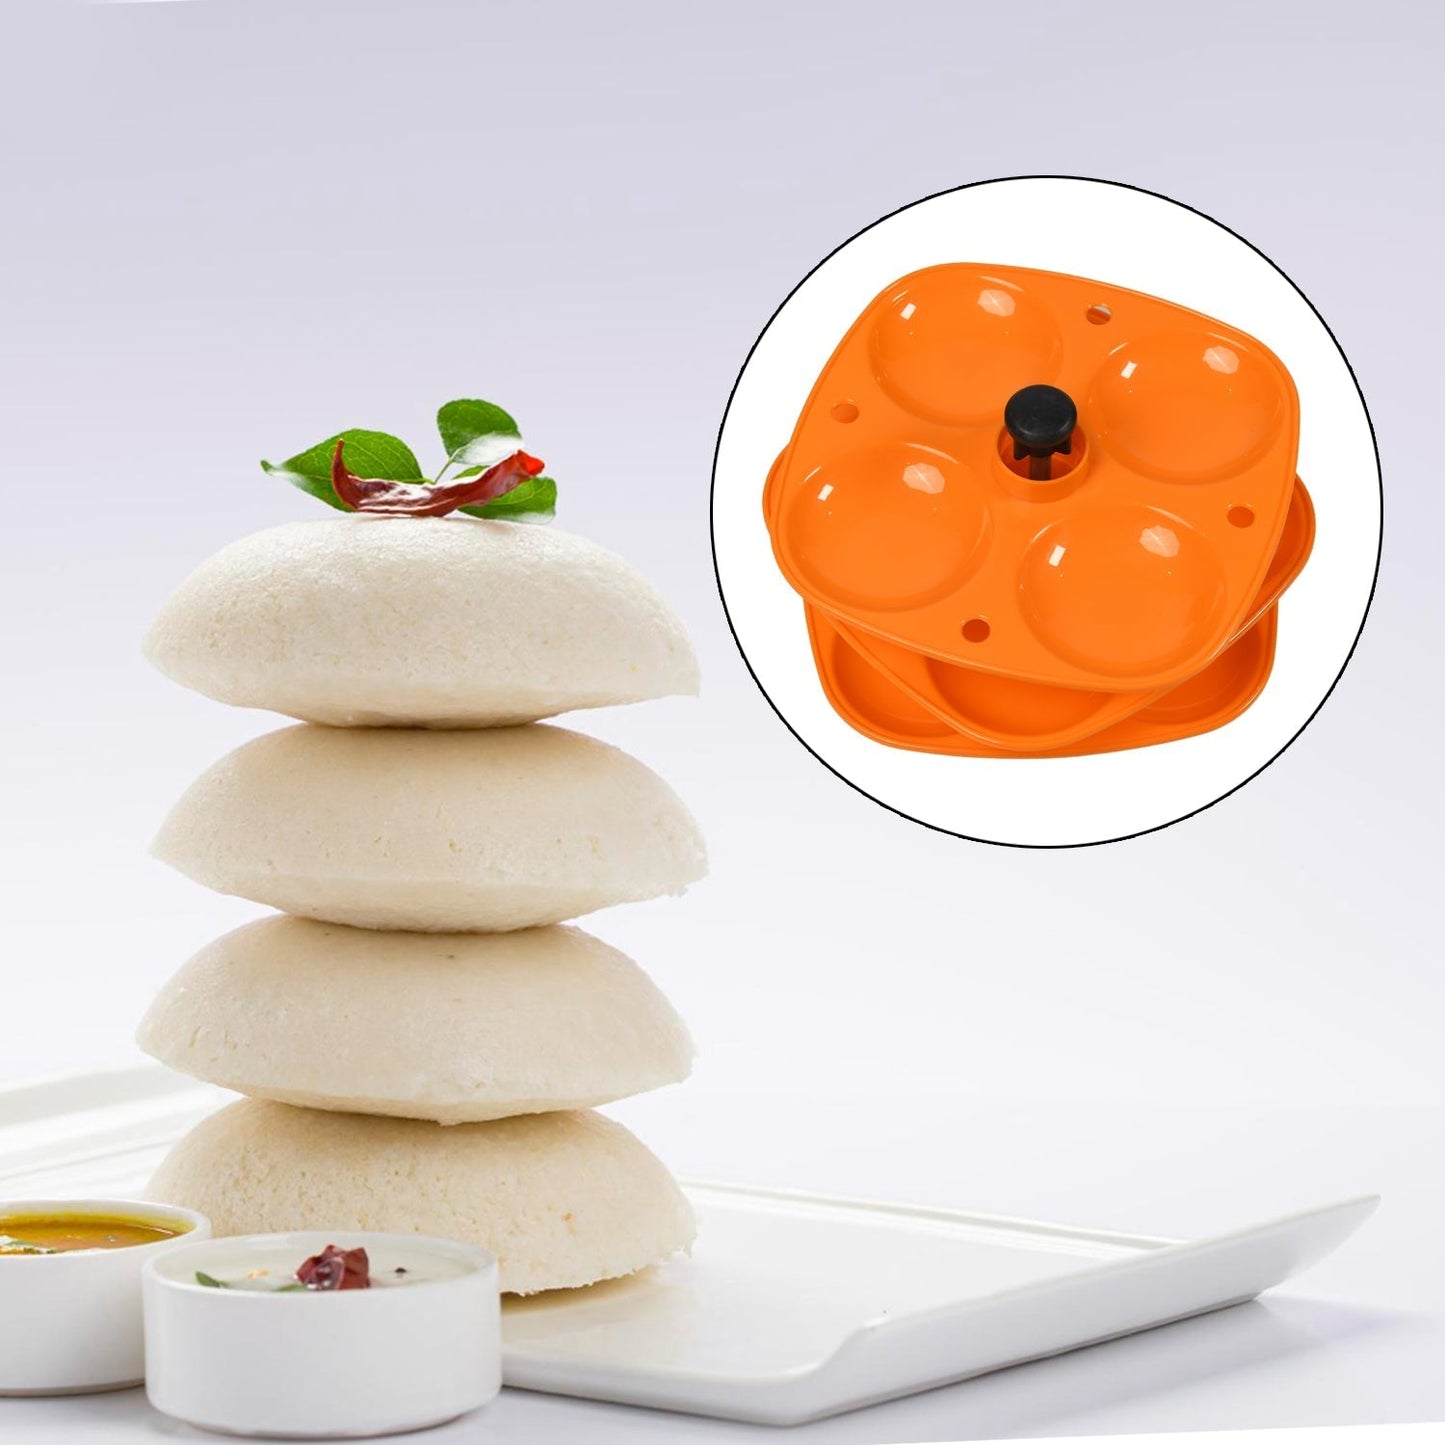 3 Layer Idli Stand used in all kinds of household kitchen purposes for holding and serving idlis.